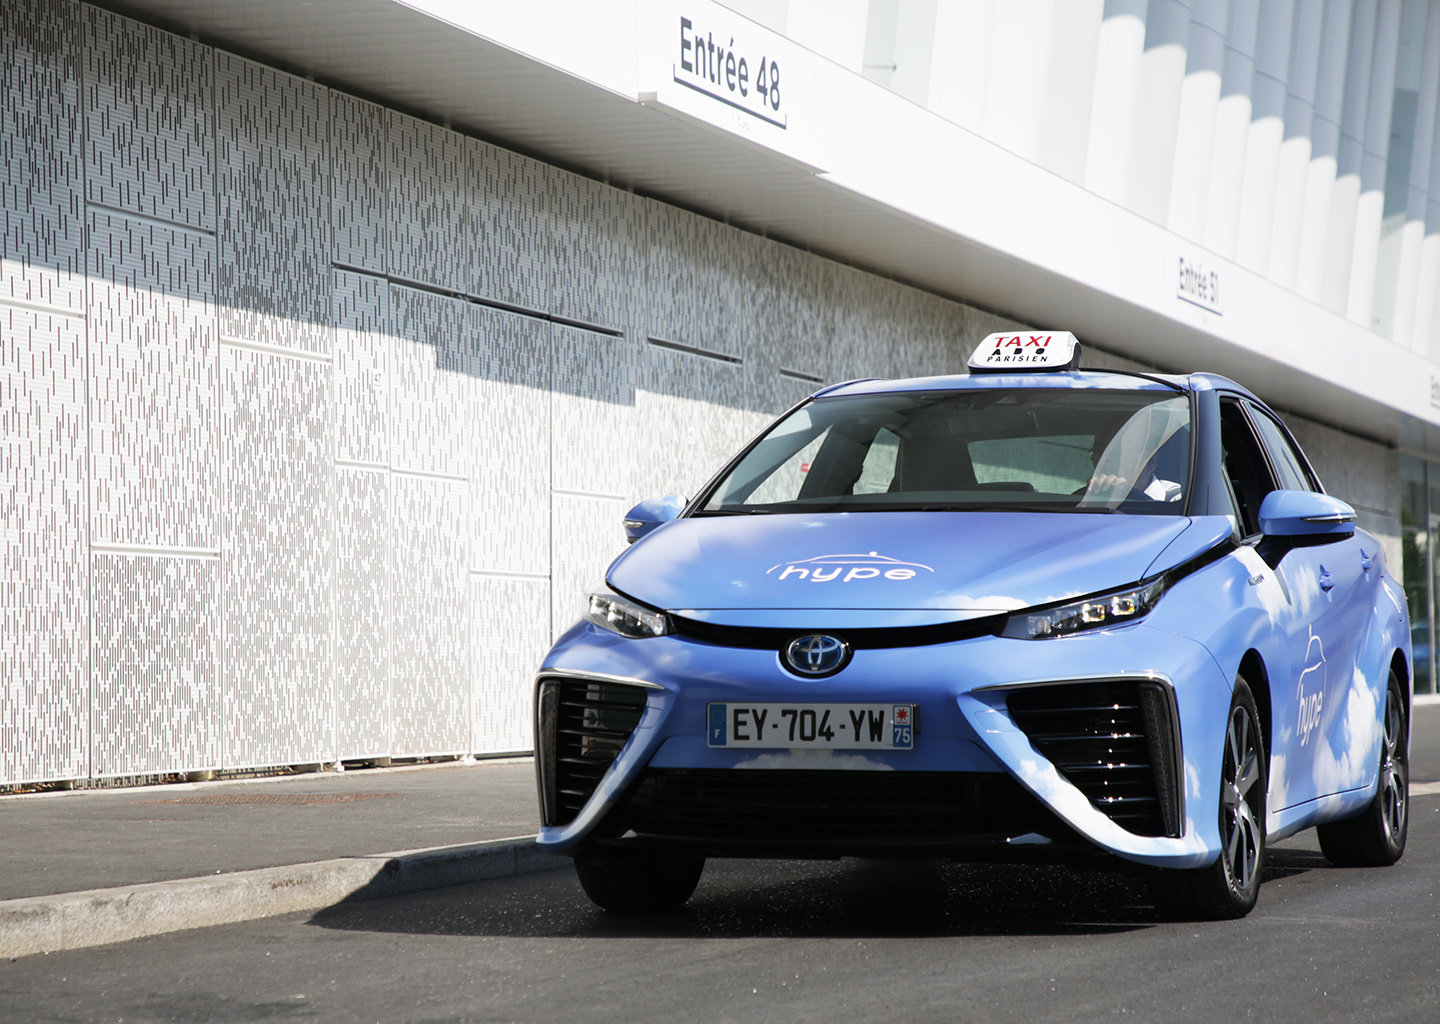 Total invest in Hype’s hydrogen taxis